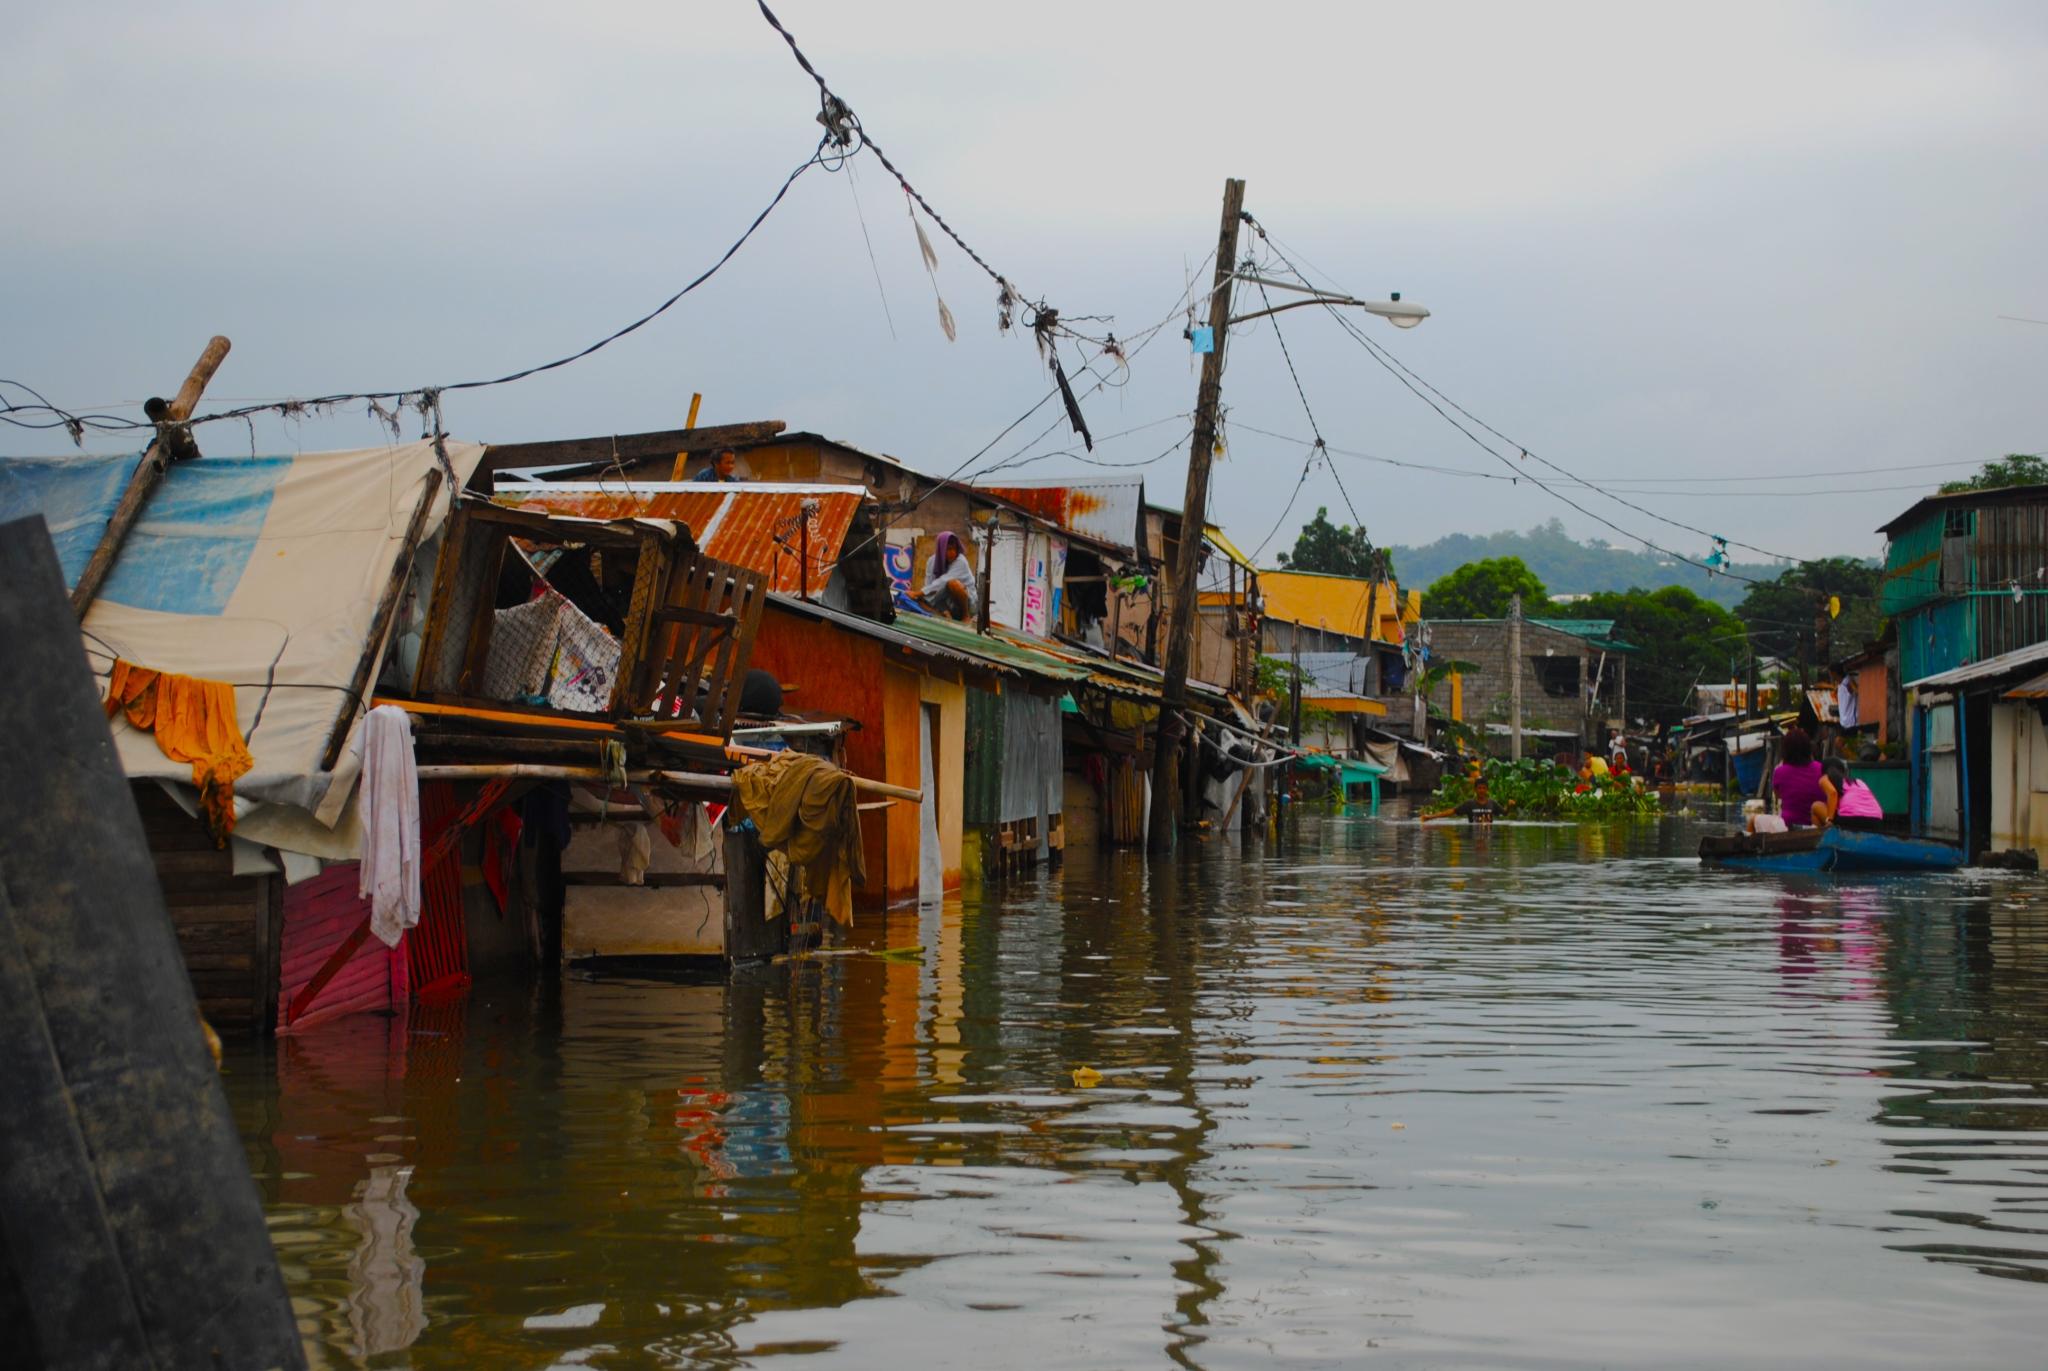 Poorer suburbs along the large Laguna lake near the capital Manila have been badly flooded after torrential rains.